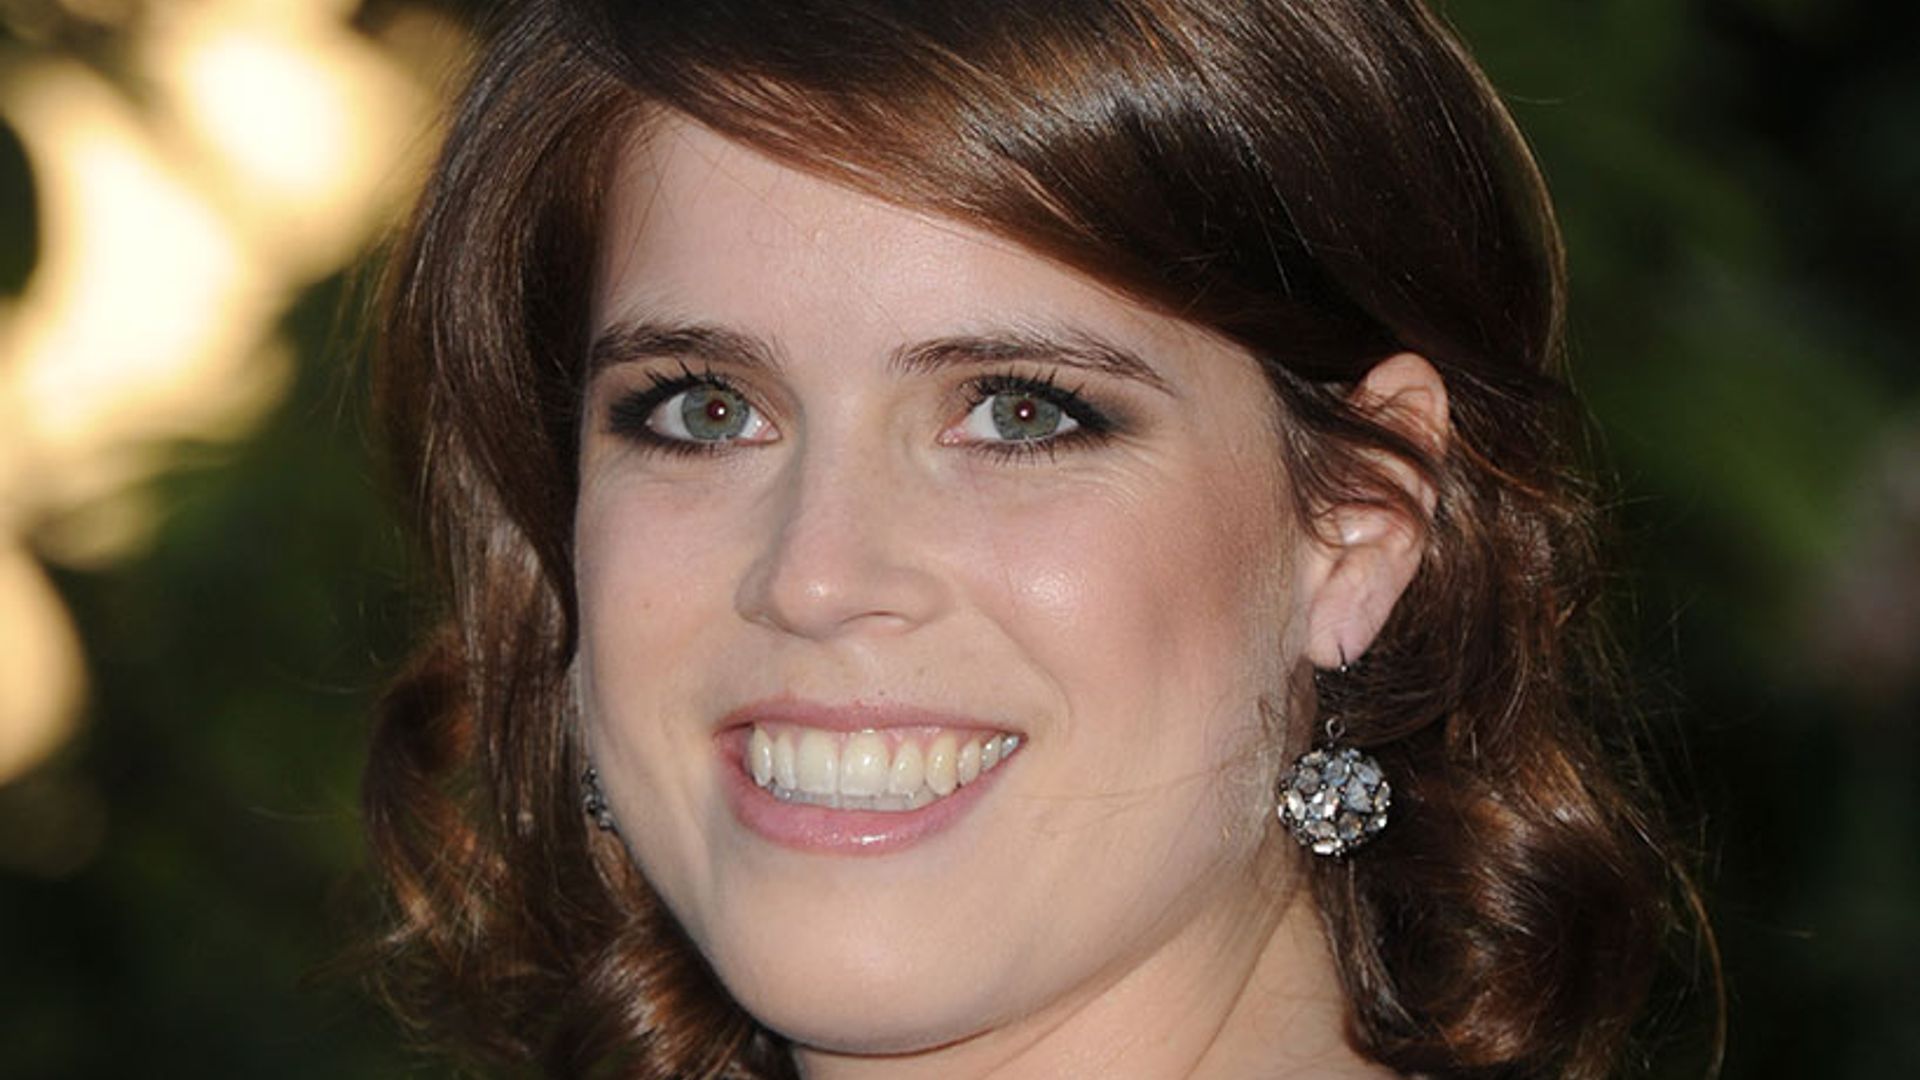 Princess Eugenie's Zara dress has the most perfect check print you've ever seen